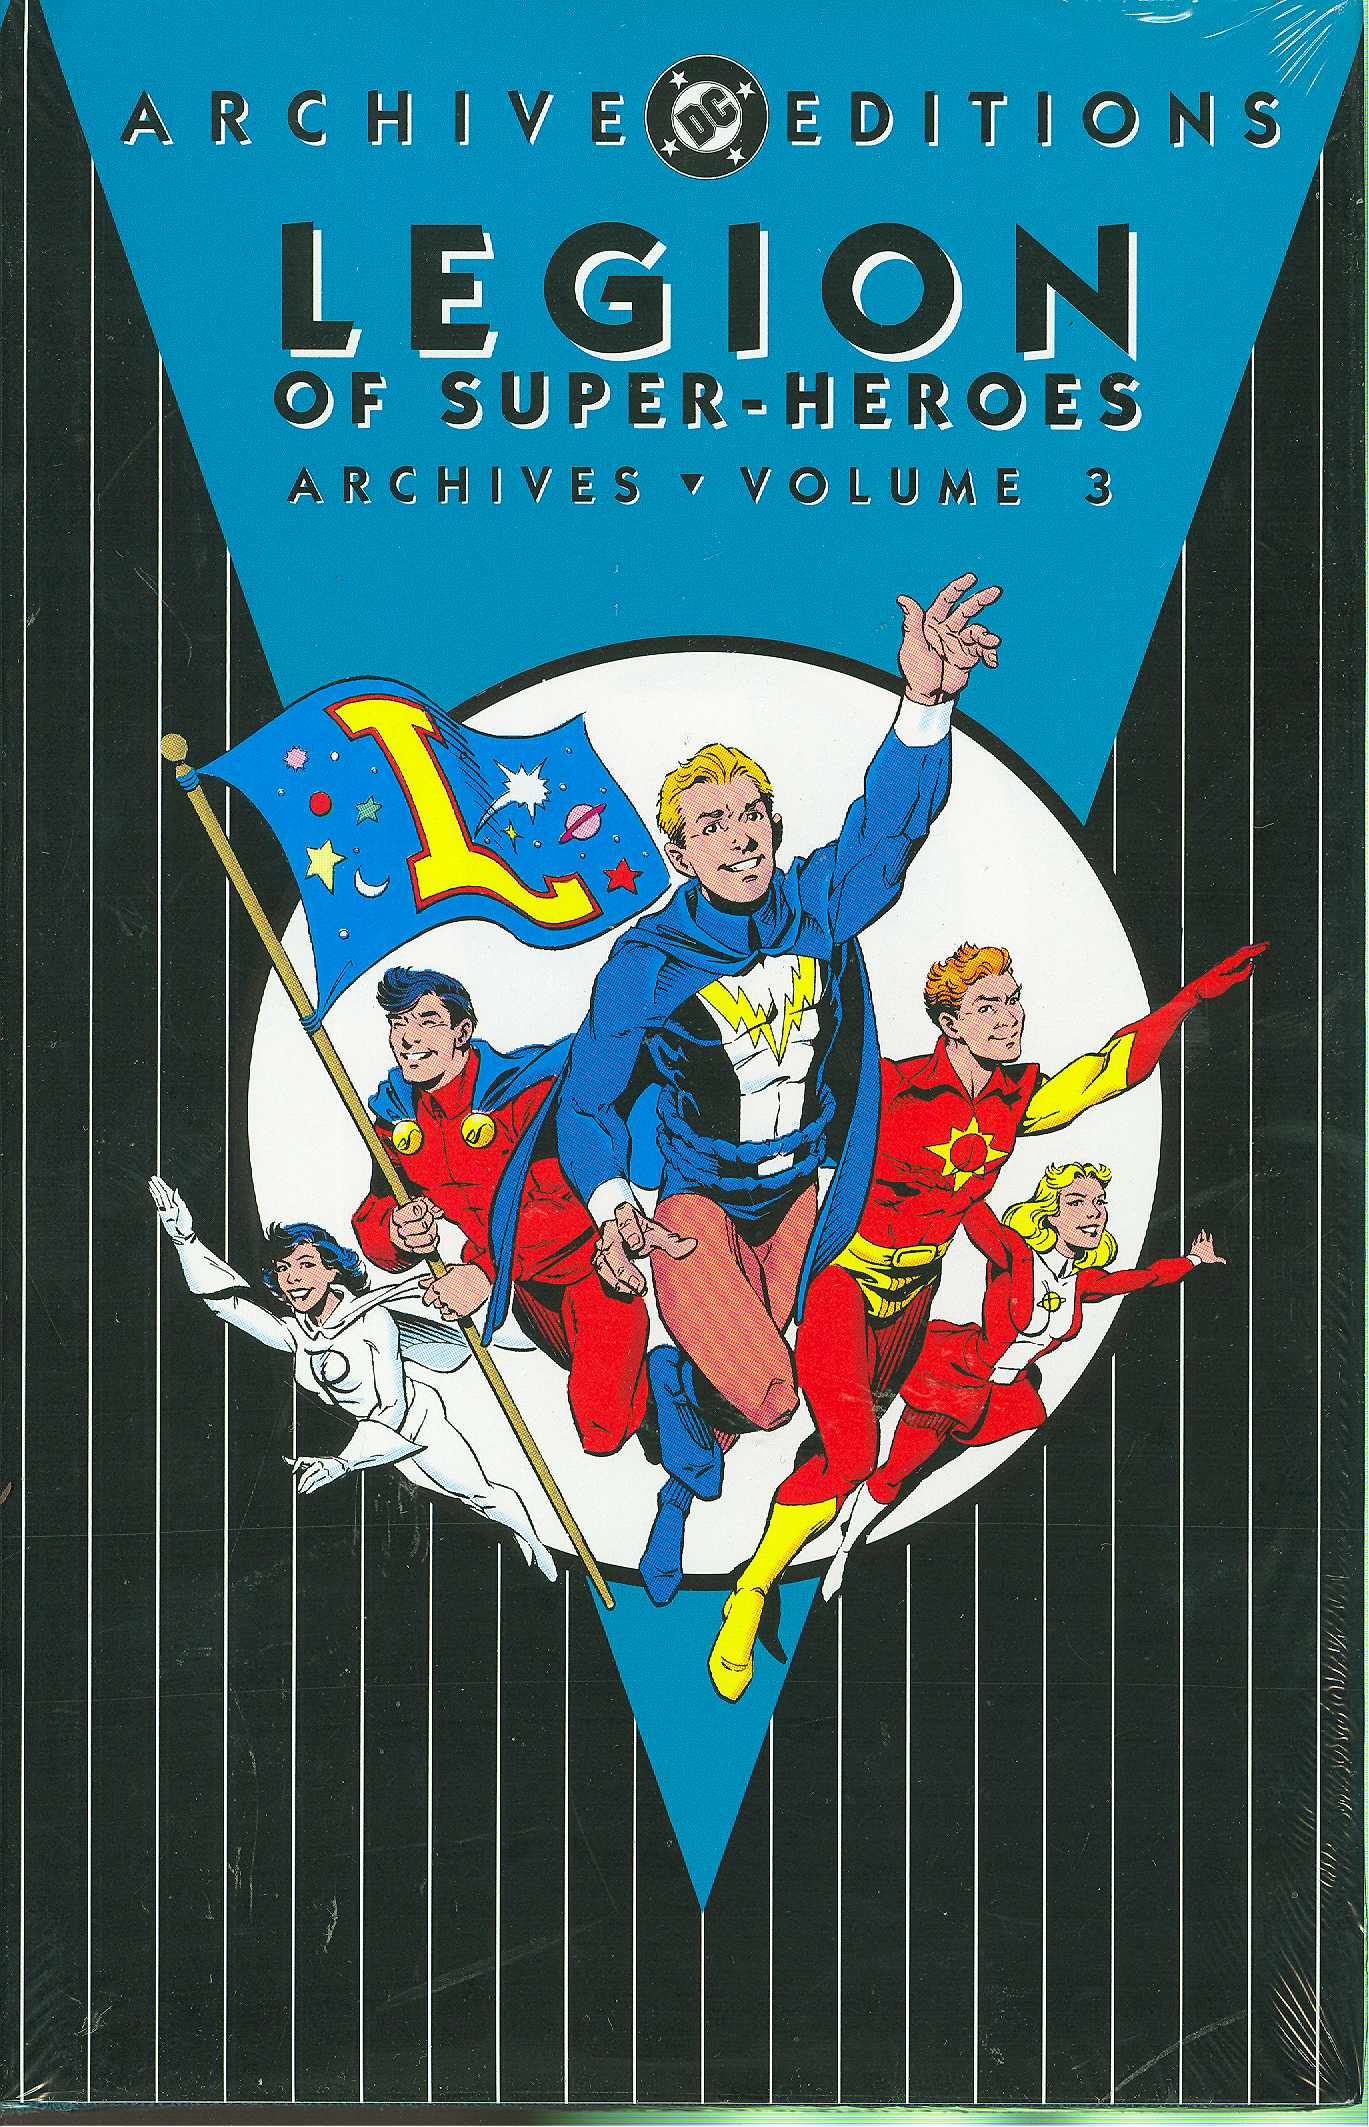 Legion of Super Heroes Archives Hardcover Volume 3